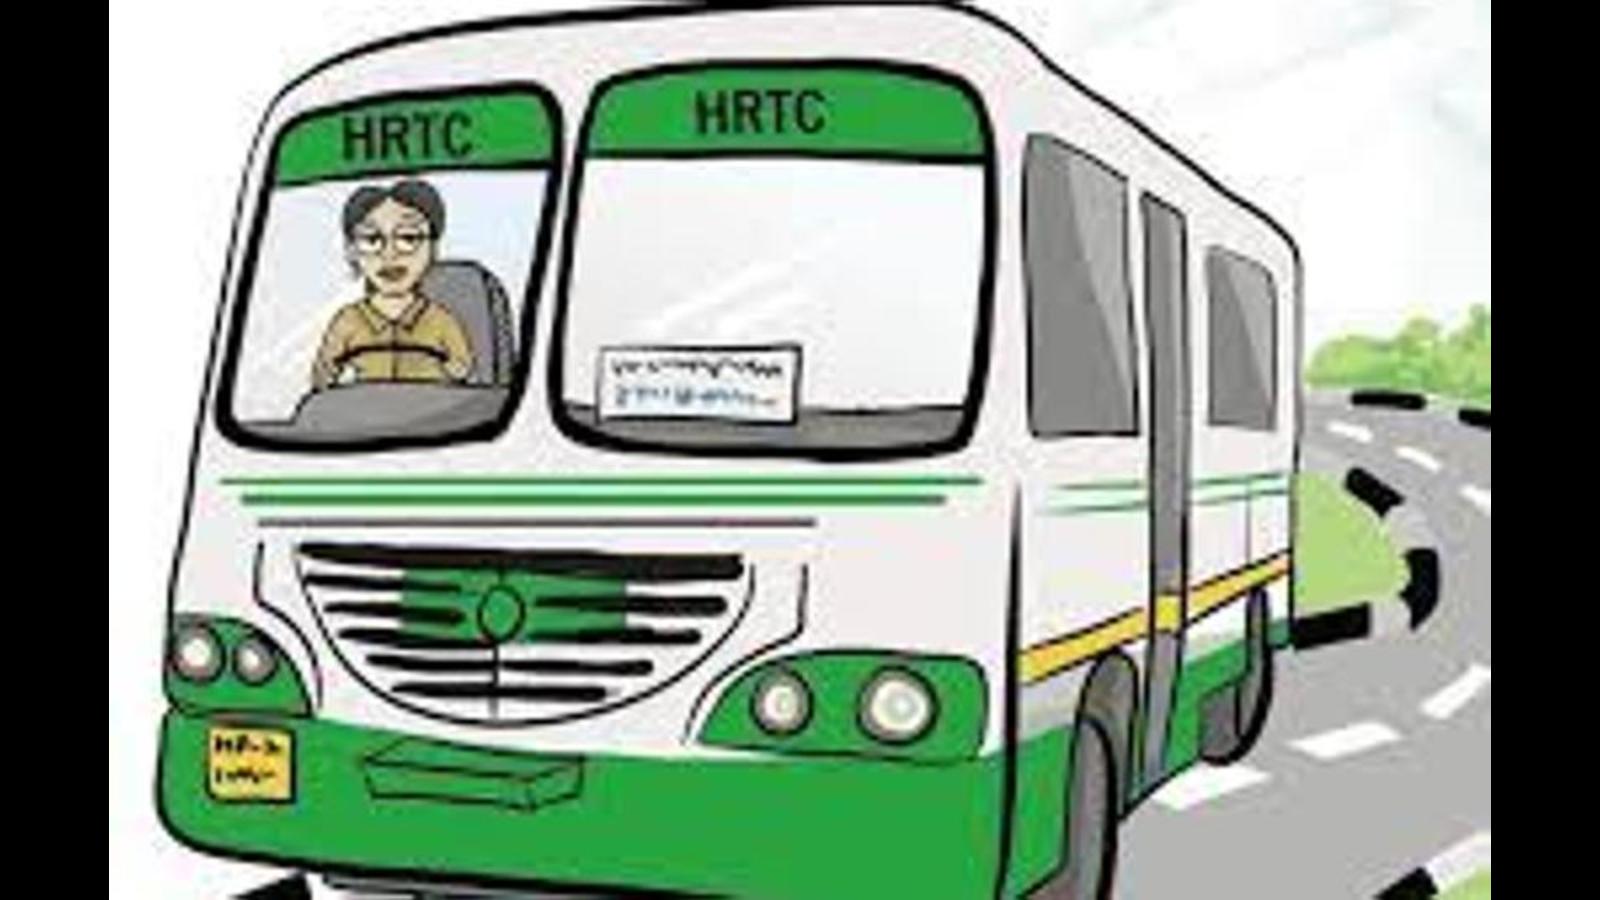 HRTC to purchase 205 new buses - Hindustan Times